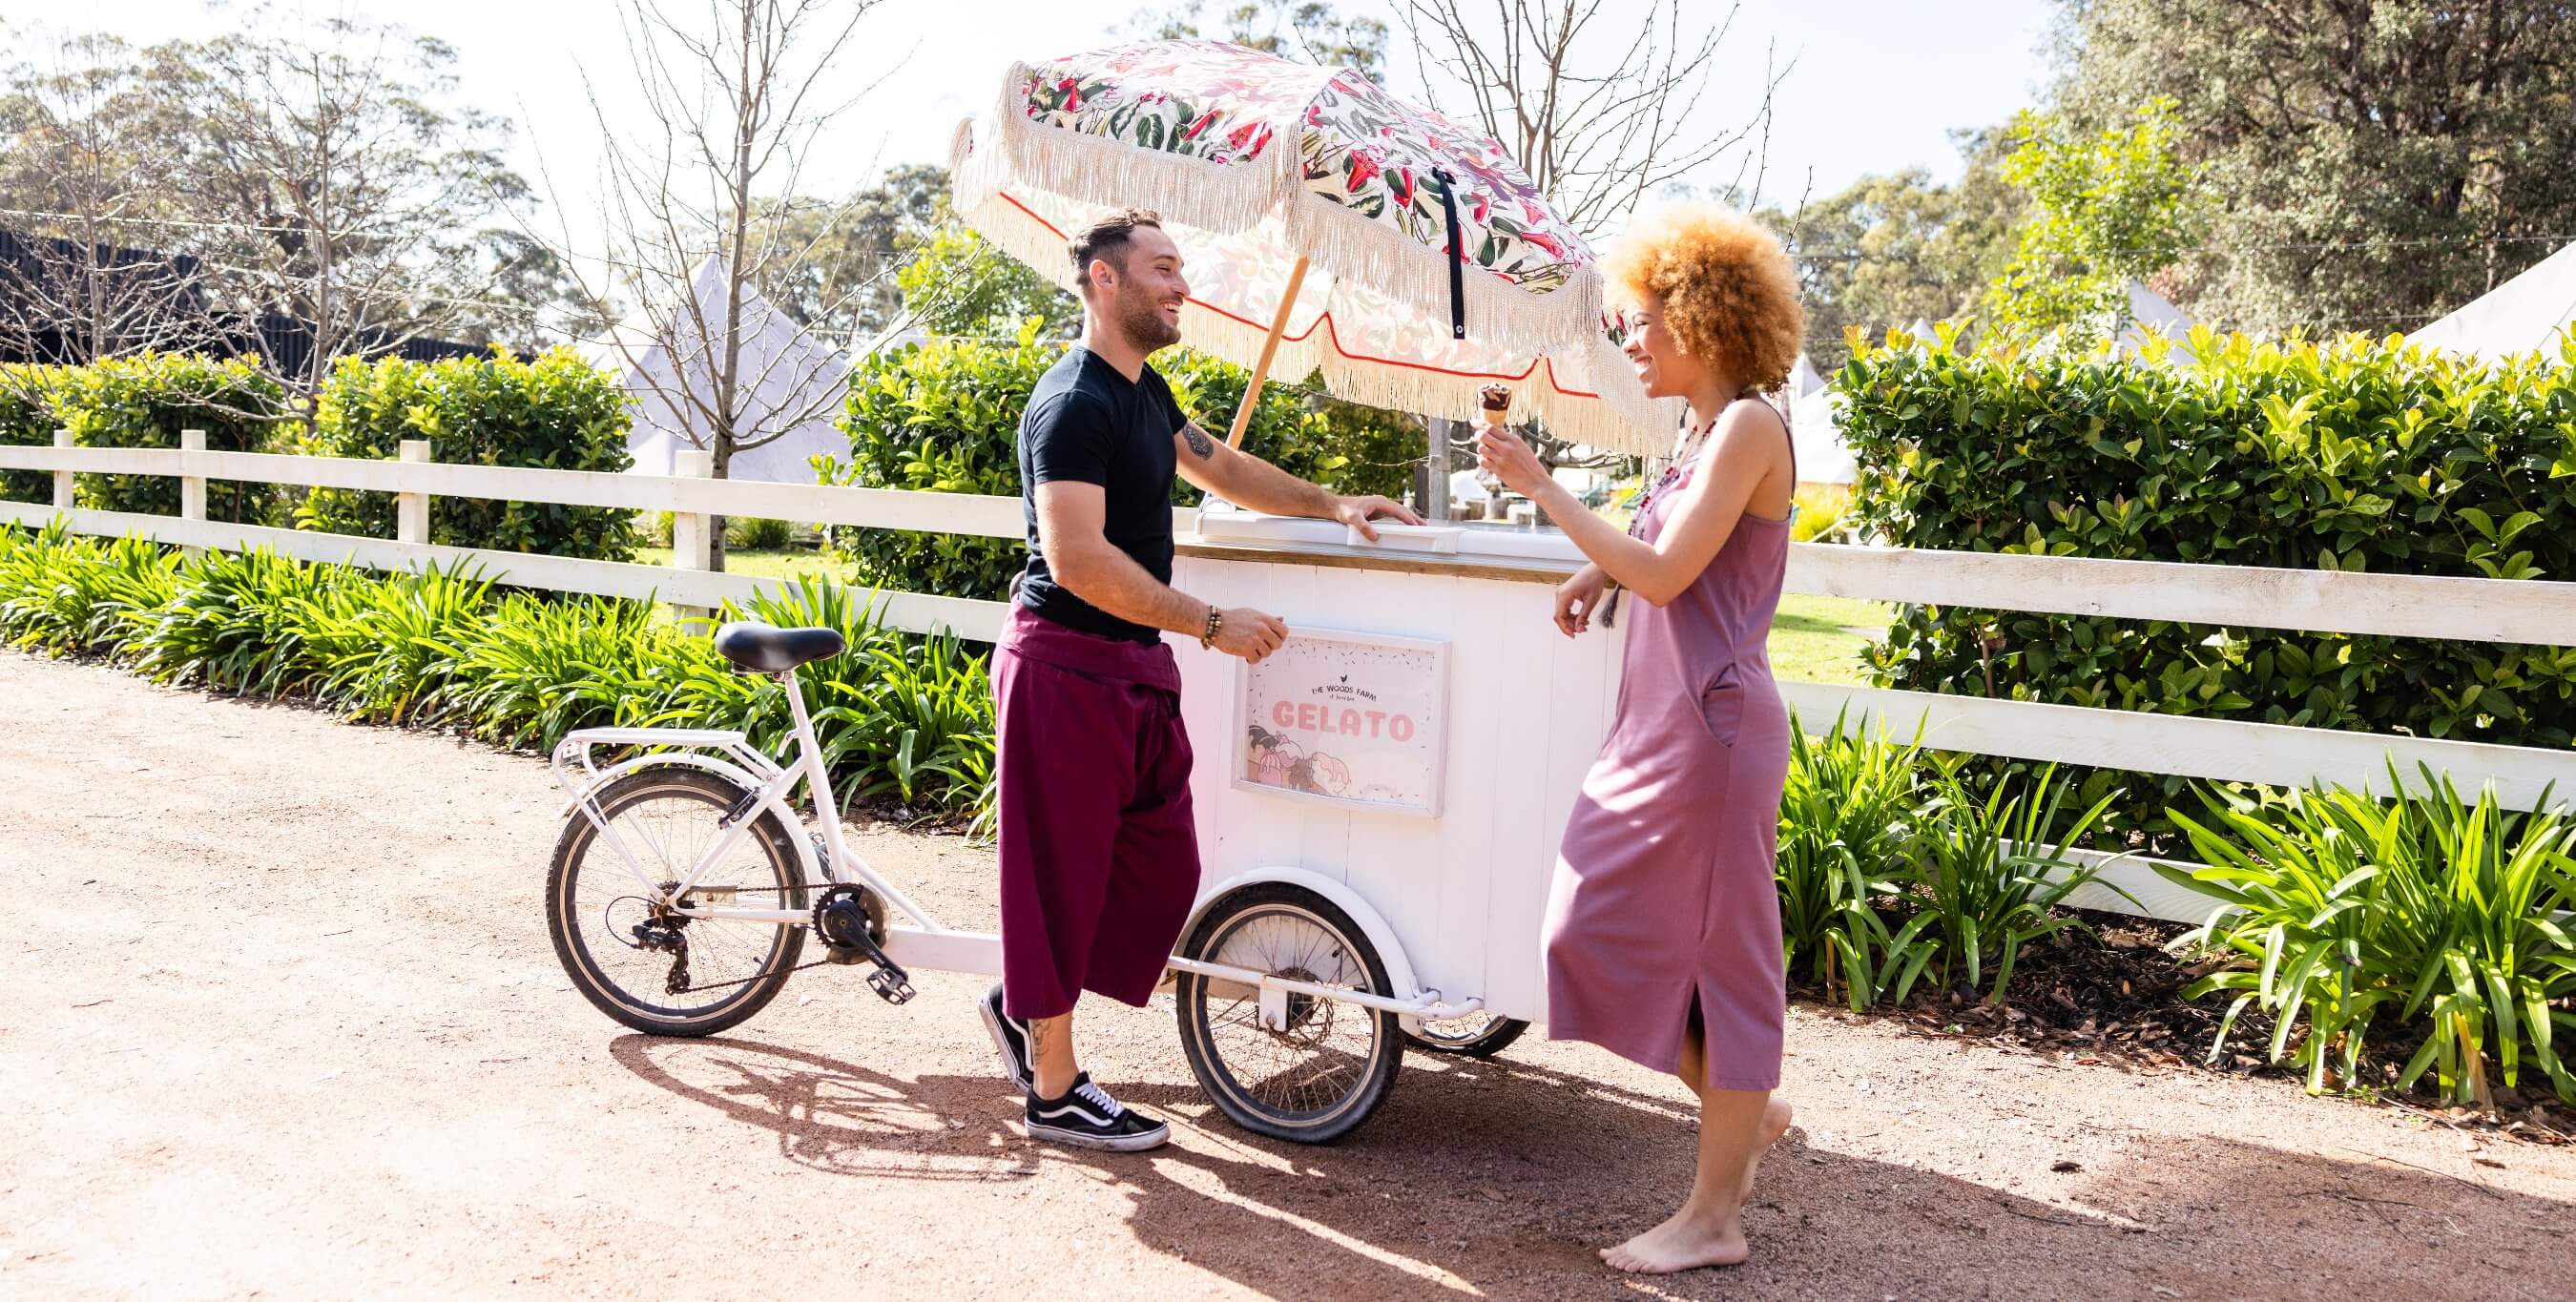 Ice Cream Cart at The Woods Farm Jervis Bay